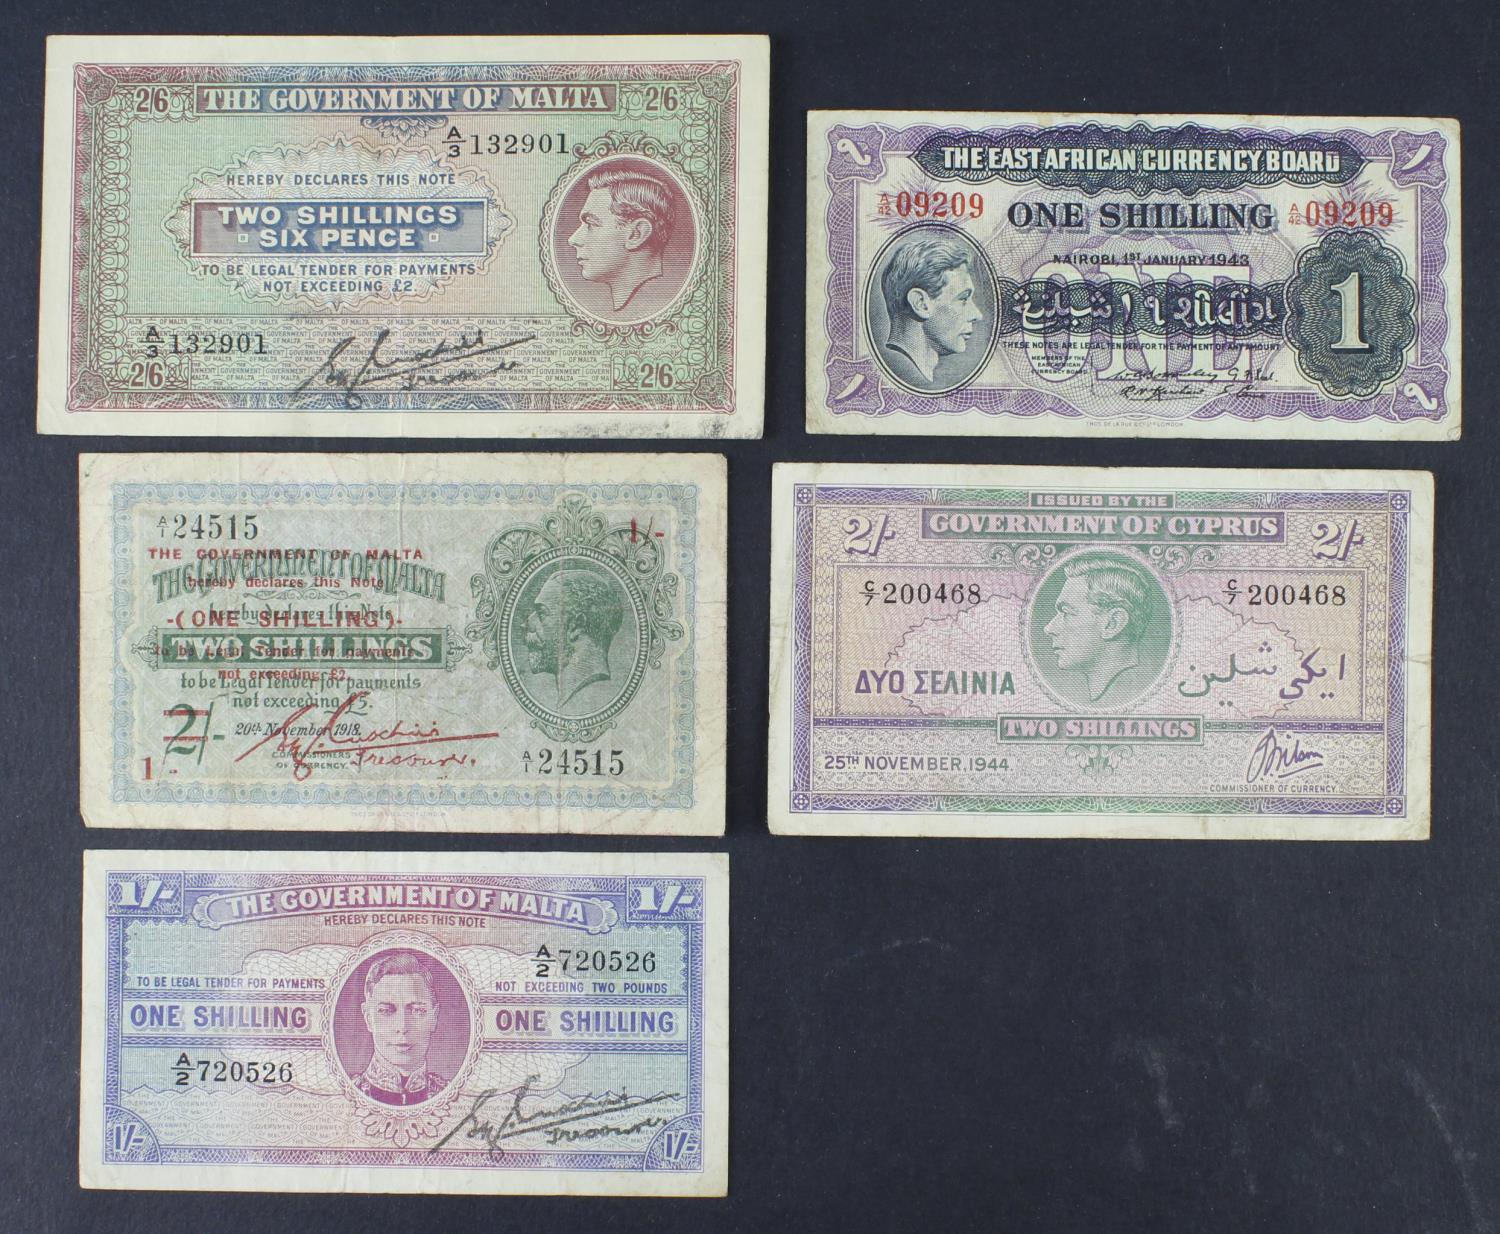 British Commonwealth (5), a group of King George VI portraits, East African Currency Board 1